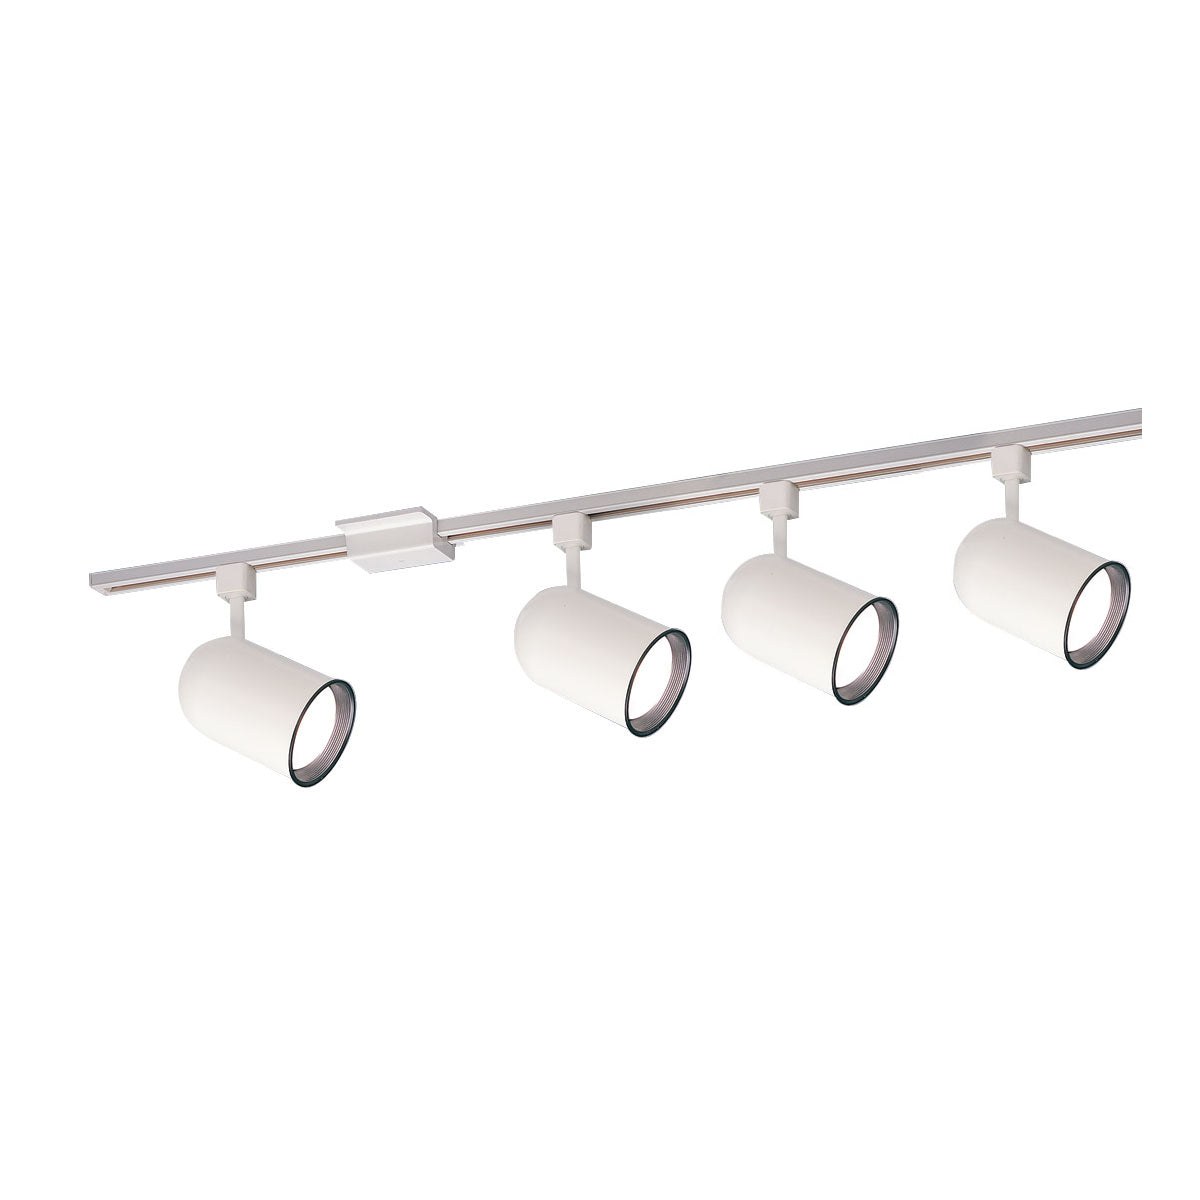 Nora Lighting NTL-156/4H - Track - 4-ft Track Pack with (4) Round Back Cylinder PAR30 Track Heads, White